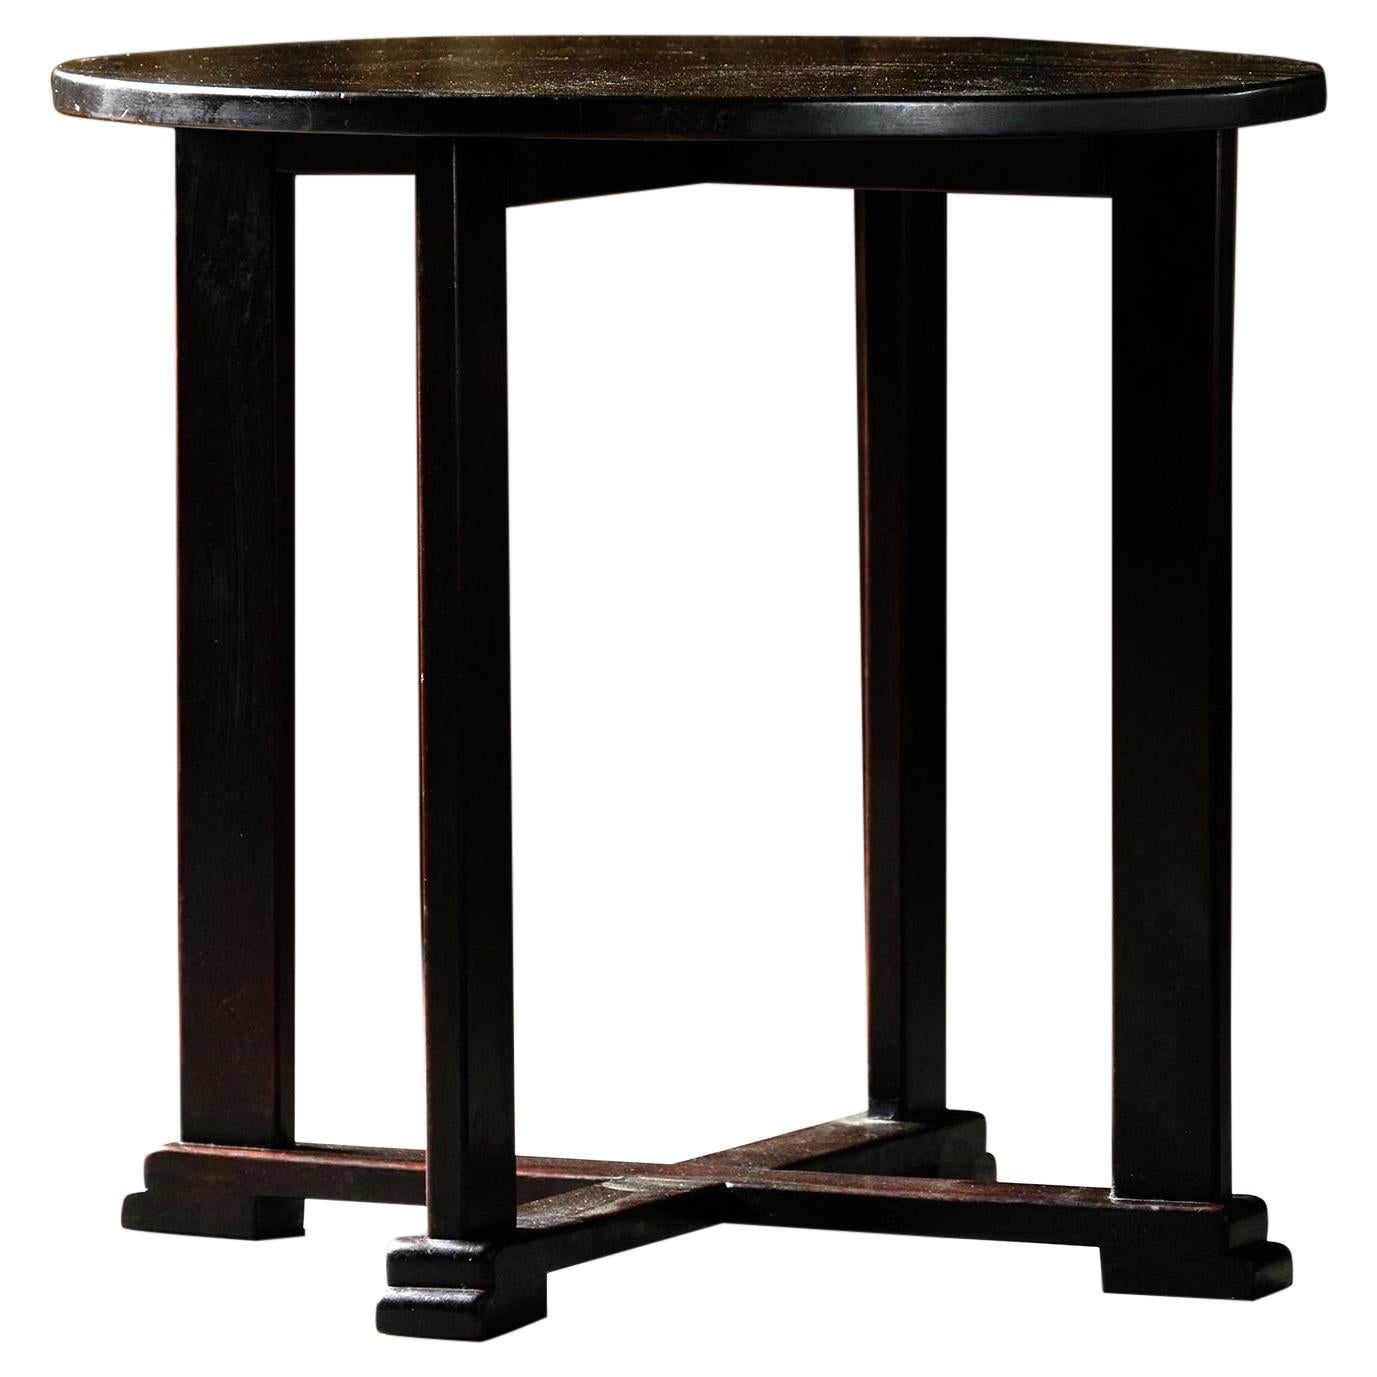 Art Deco Side or Coffee Table with Simple, Classic Design